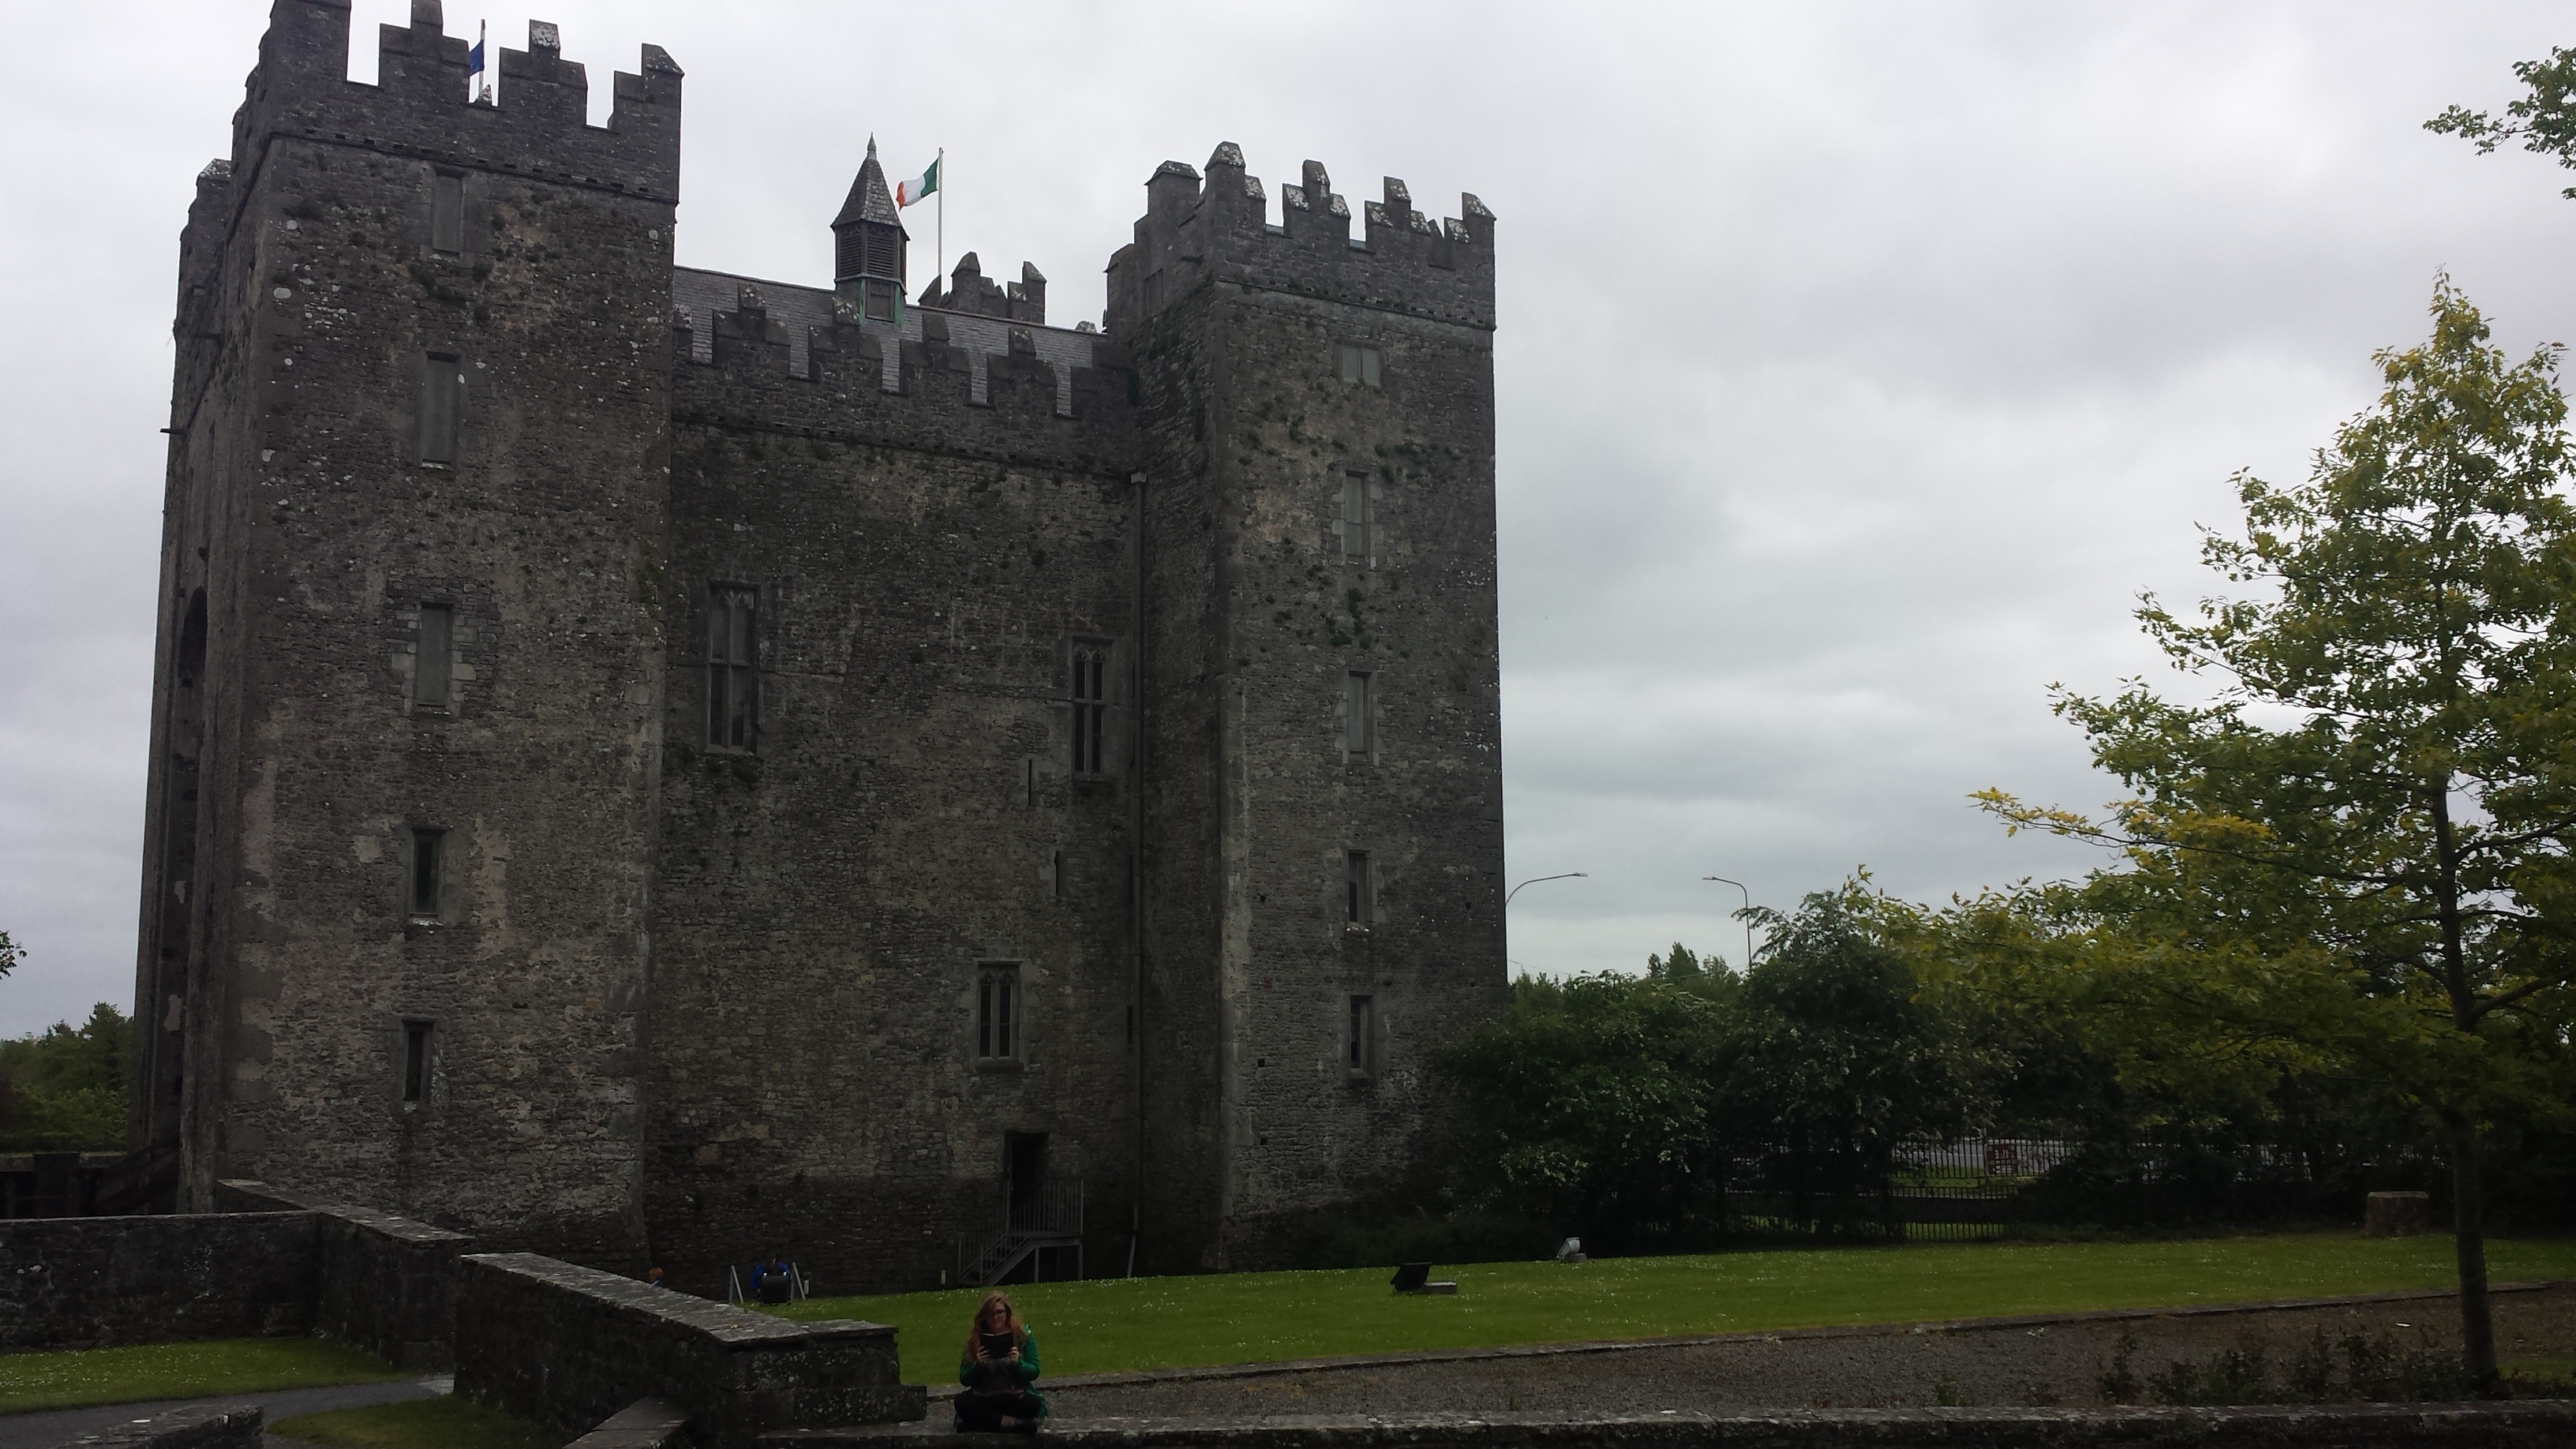 Picture of bunratty castle. It is square and has four towers.